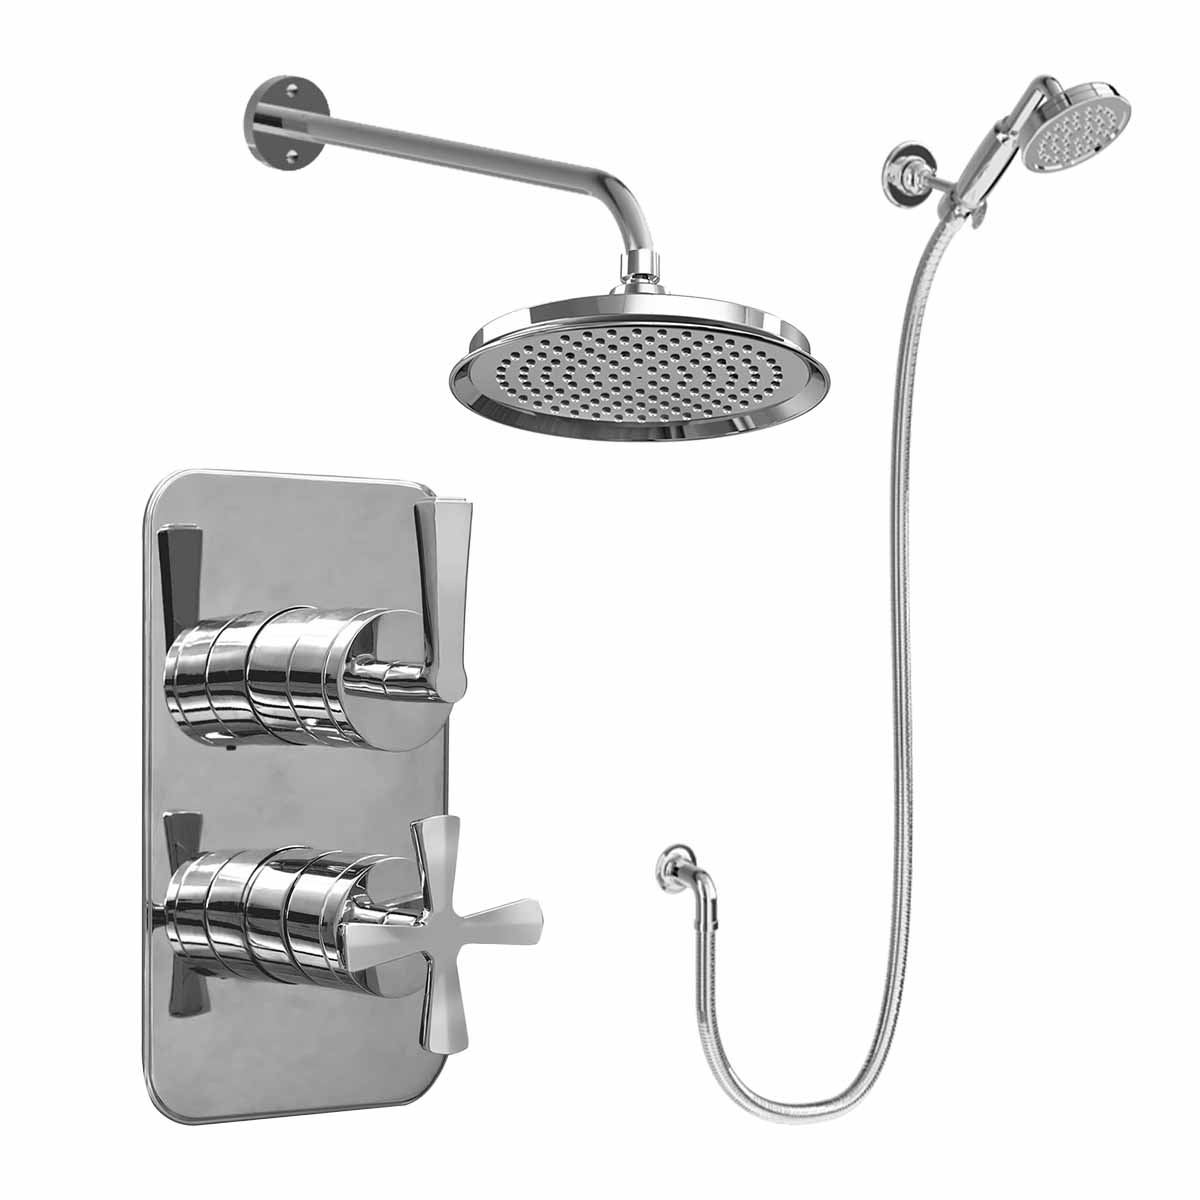 Burlington Riviera Shower Valve With Wall-Mounted Fixed Overhead and Handset Chrome Deluxe Bathrooms Ireland